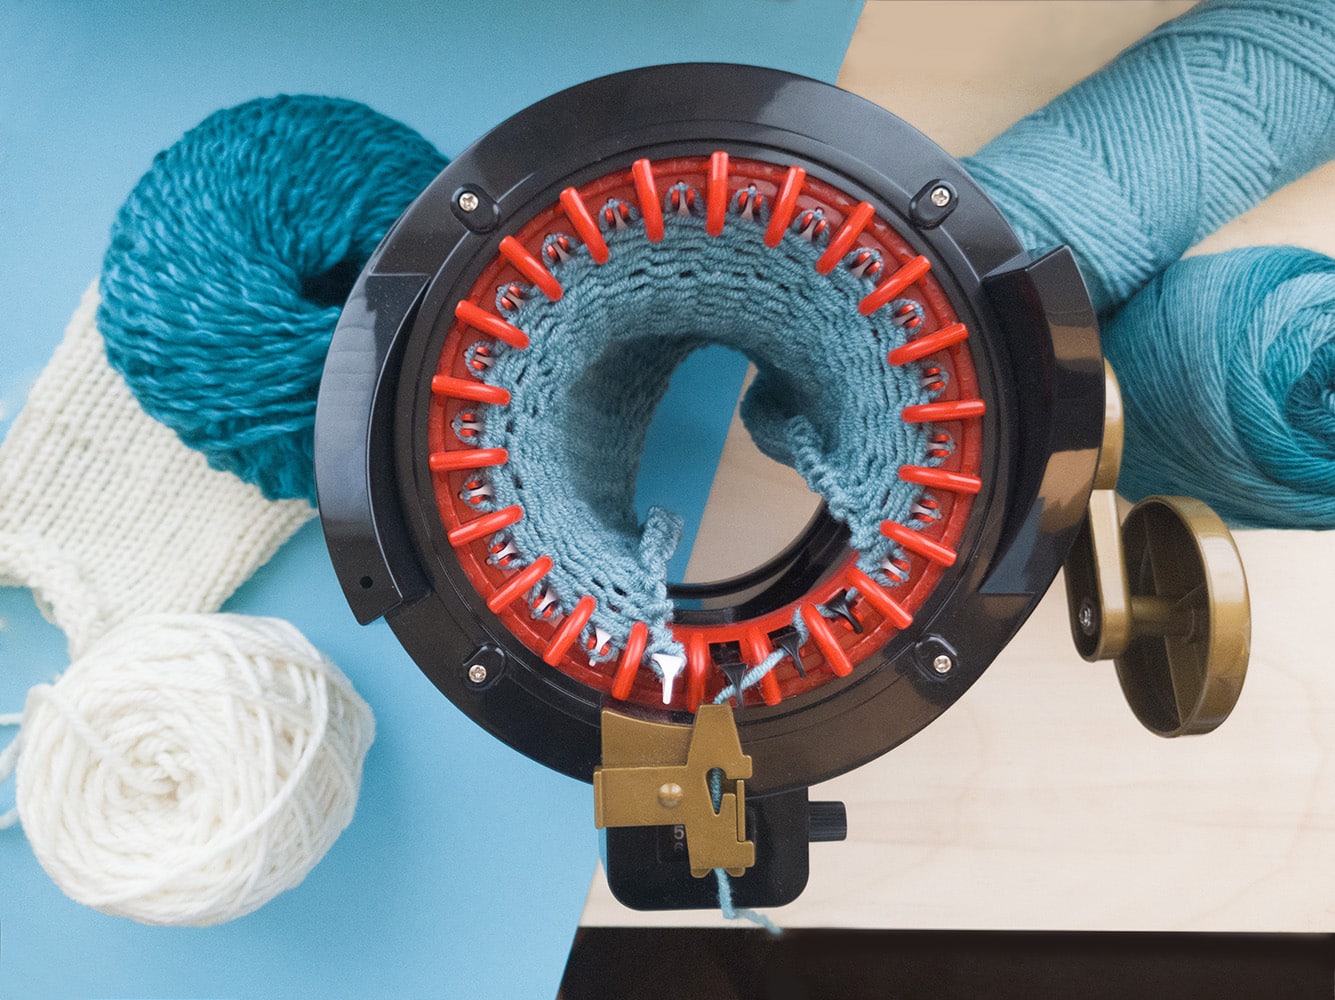 The Essential Guide to Machine Knitting with the addiExpress